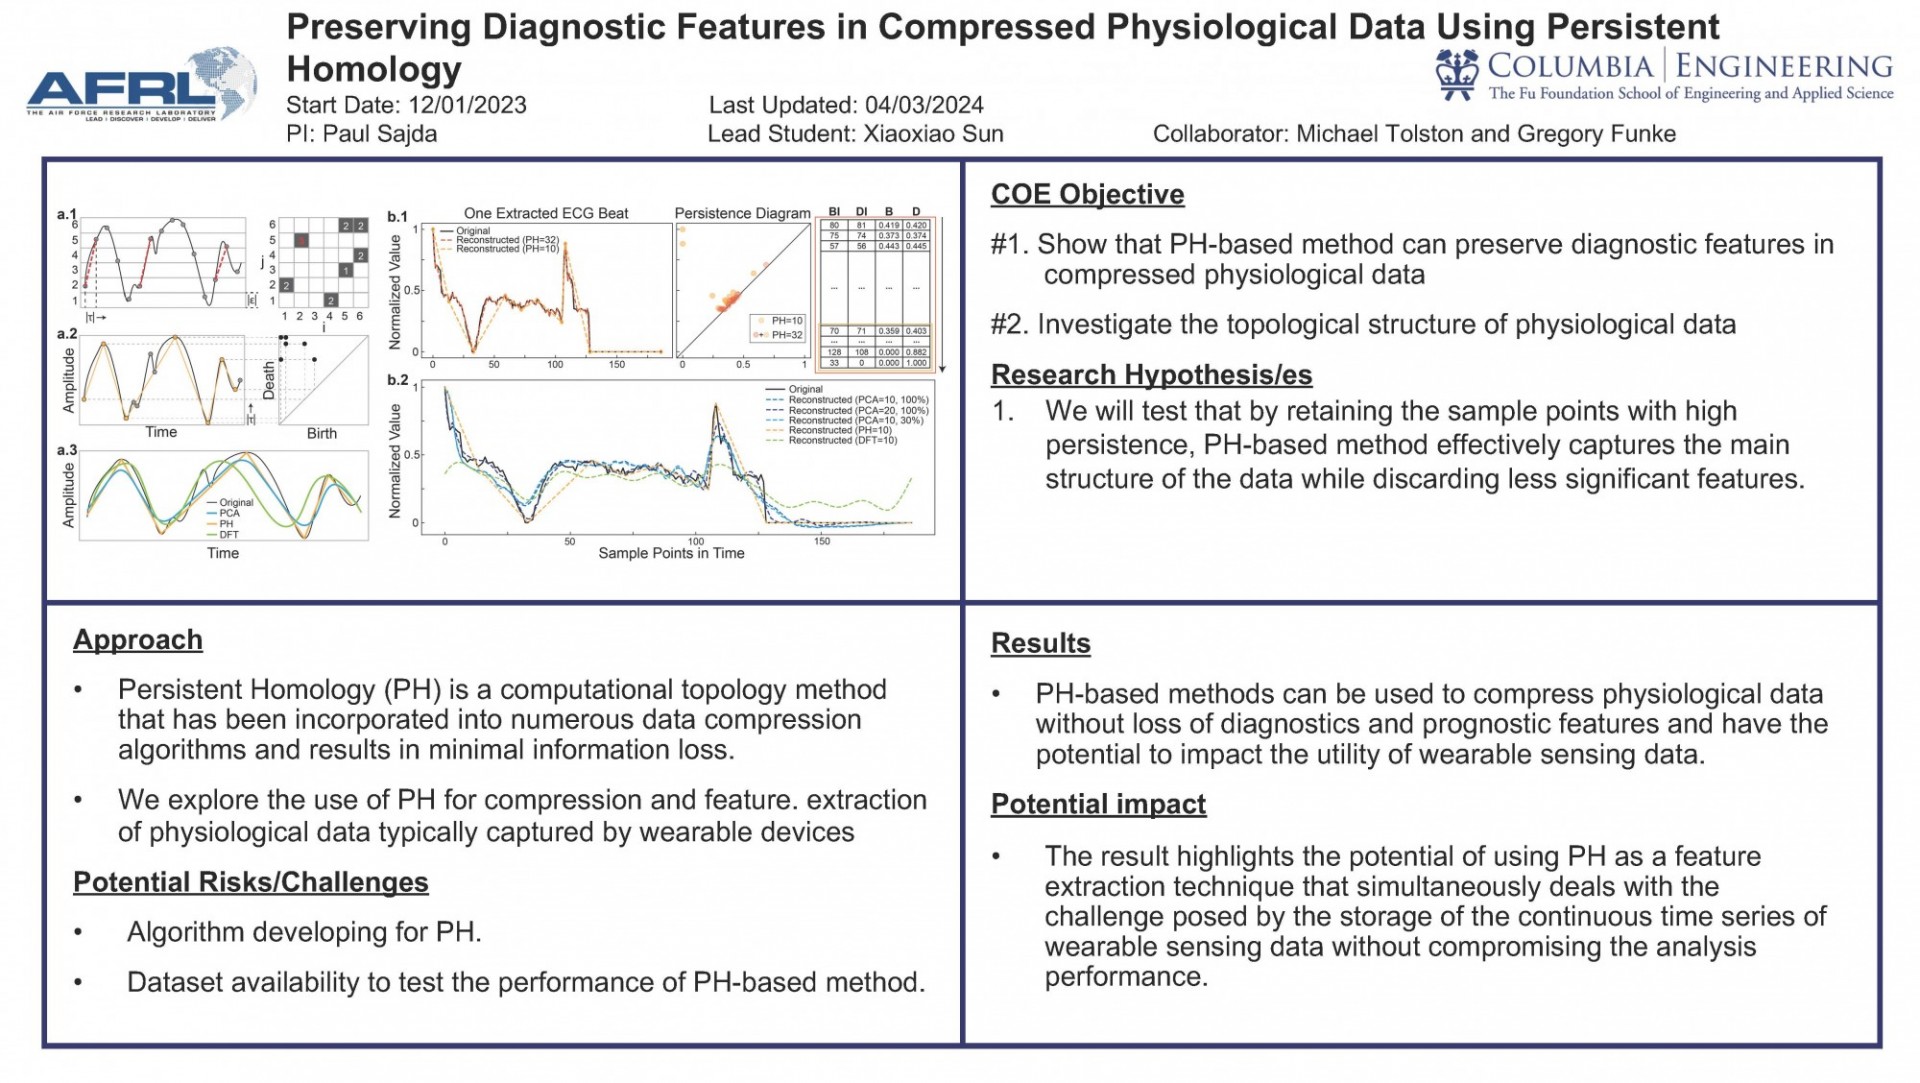 "Preserving Diagnostic Features in Compressed Physiological Data Using Persistent Homology"